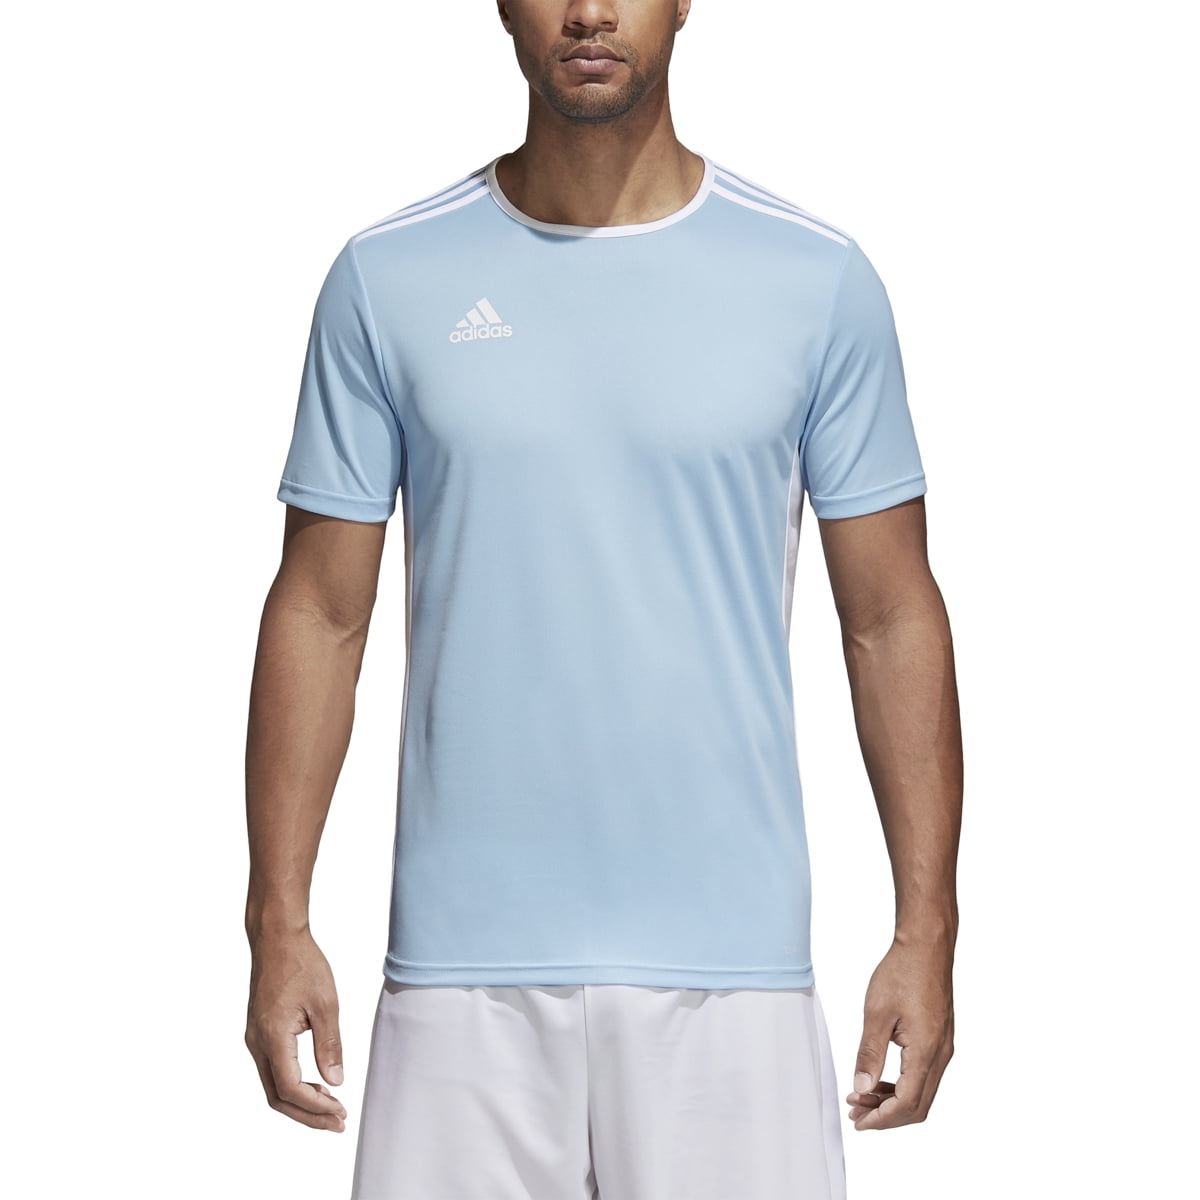 Adidas Men's Soccer Entrada 18 Jersey Adidas - Ships Directly From ...